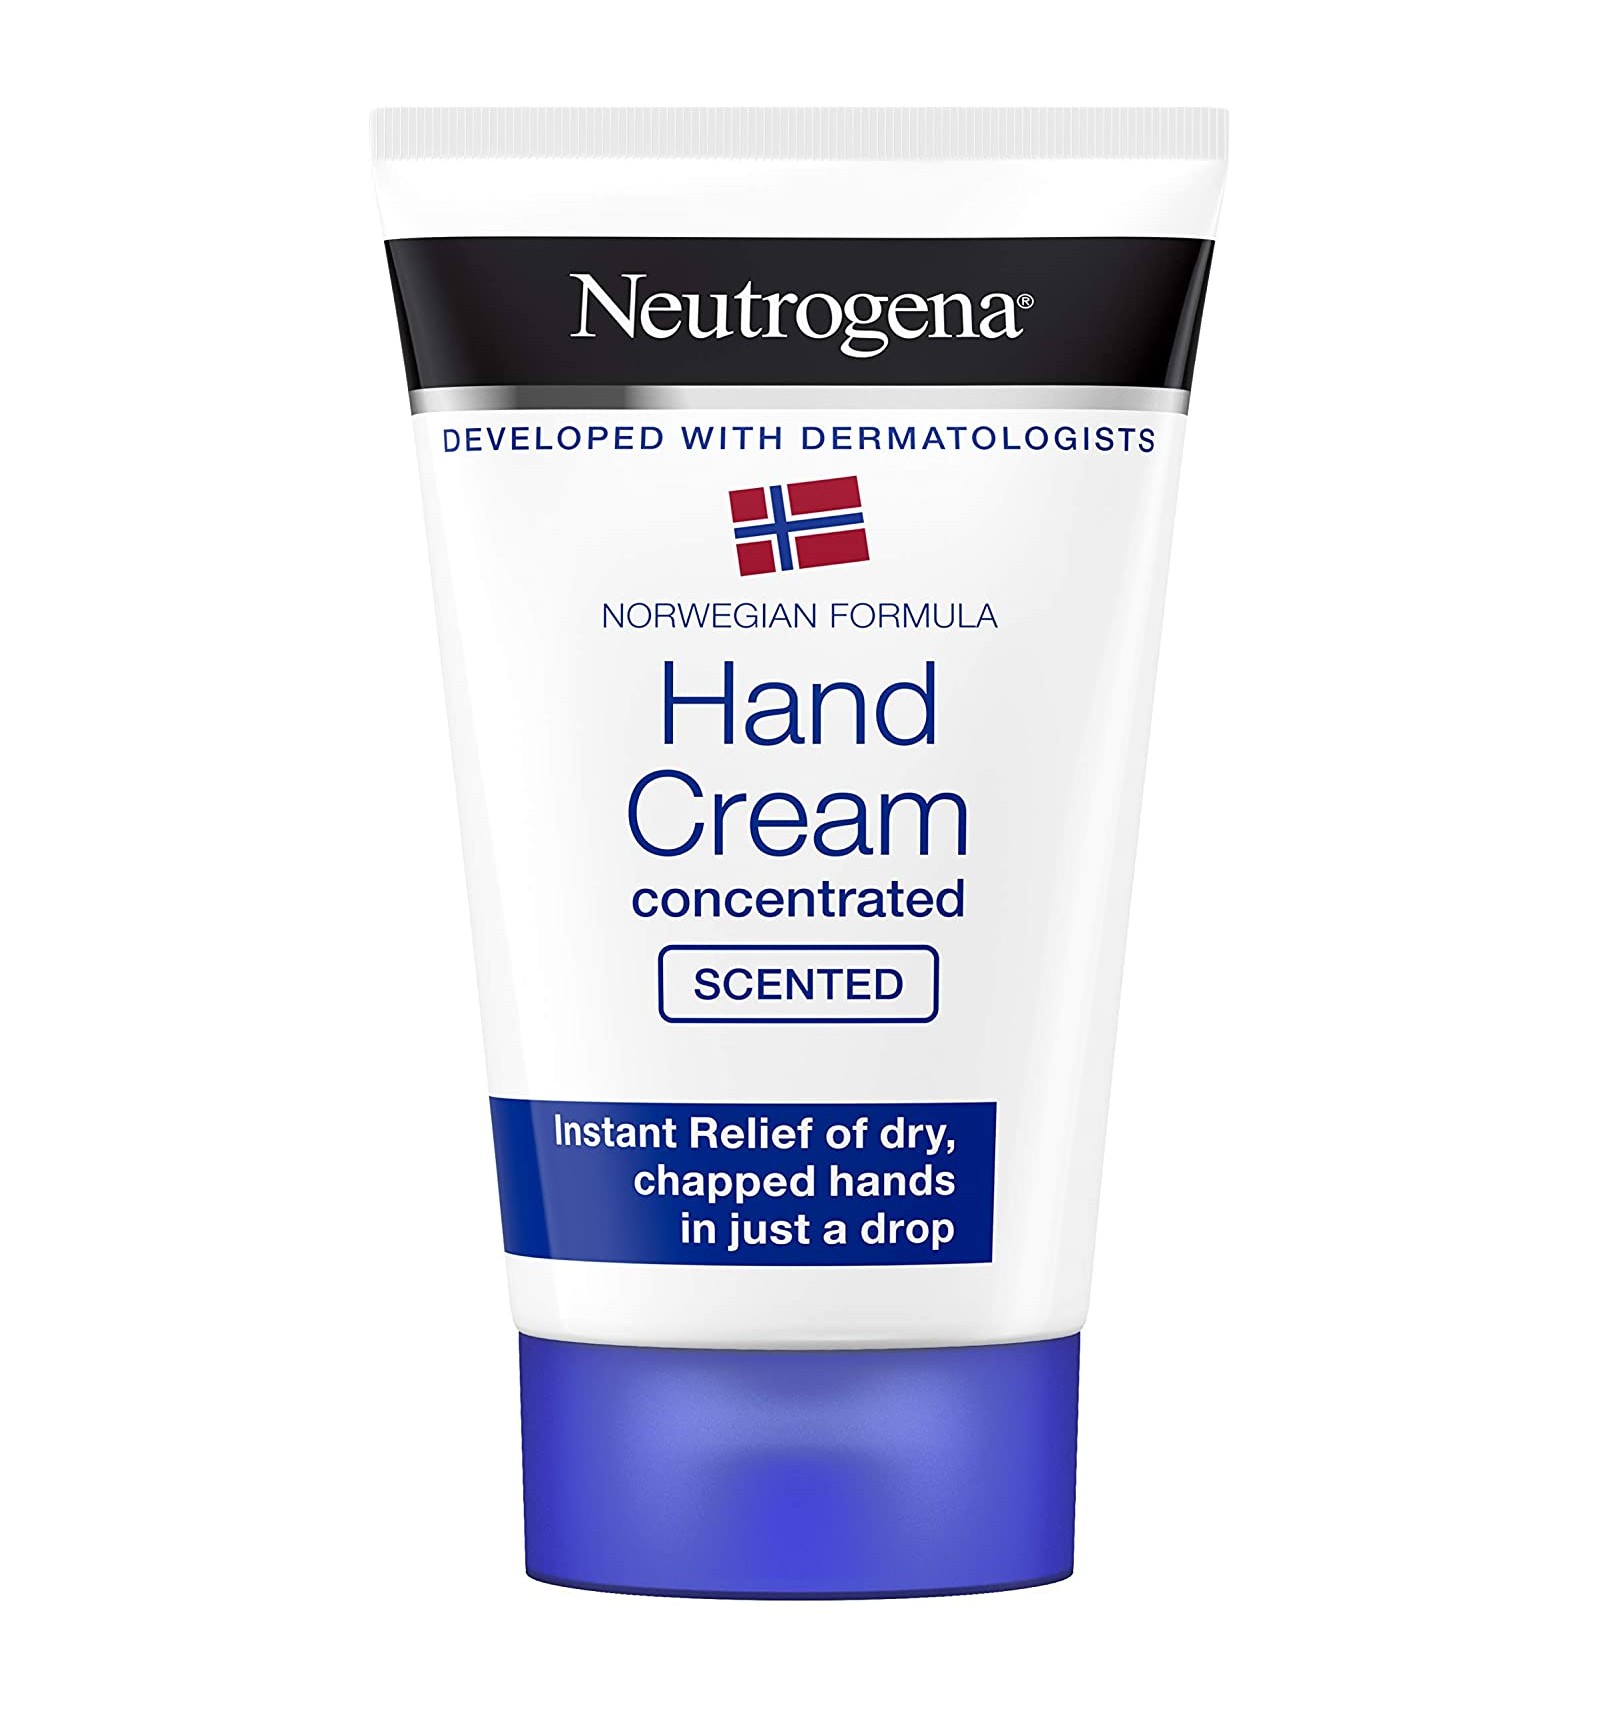 Neutrogena Concentrated SCENTED Hand Cream, 50 ml